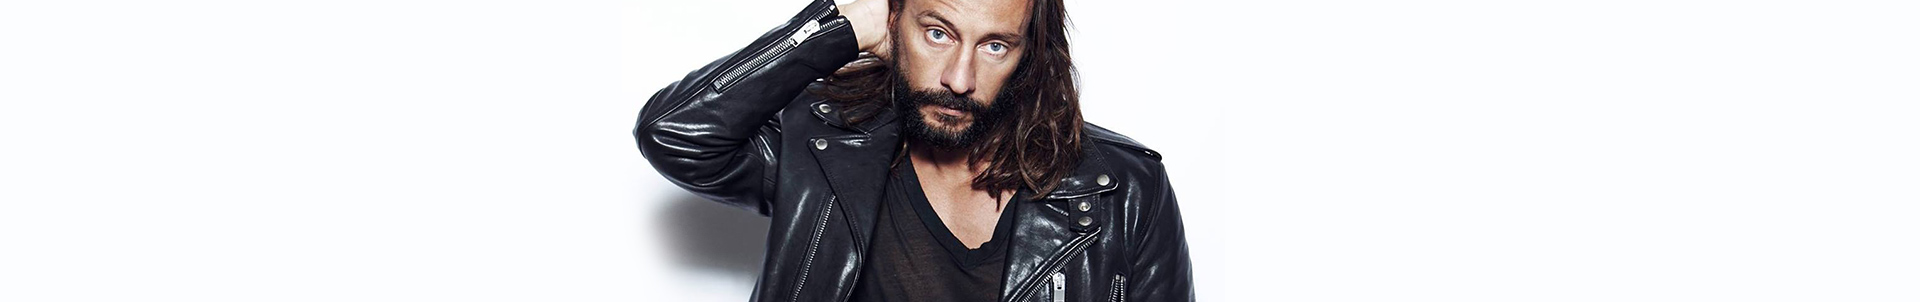 New video and free download! Bob Sinclar with 'Stand Up'